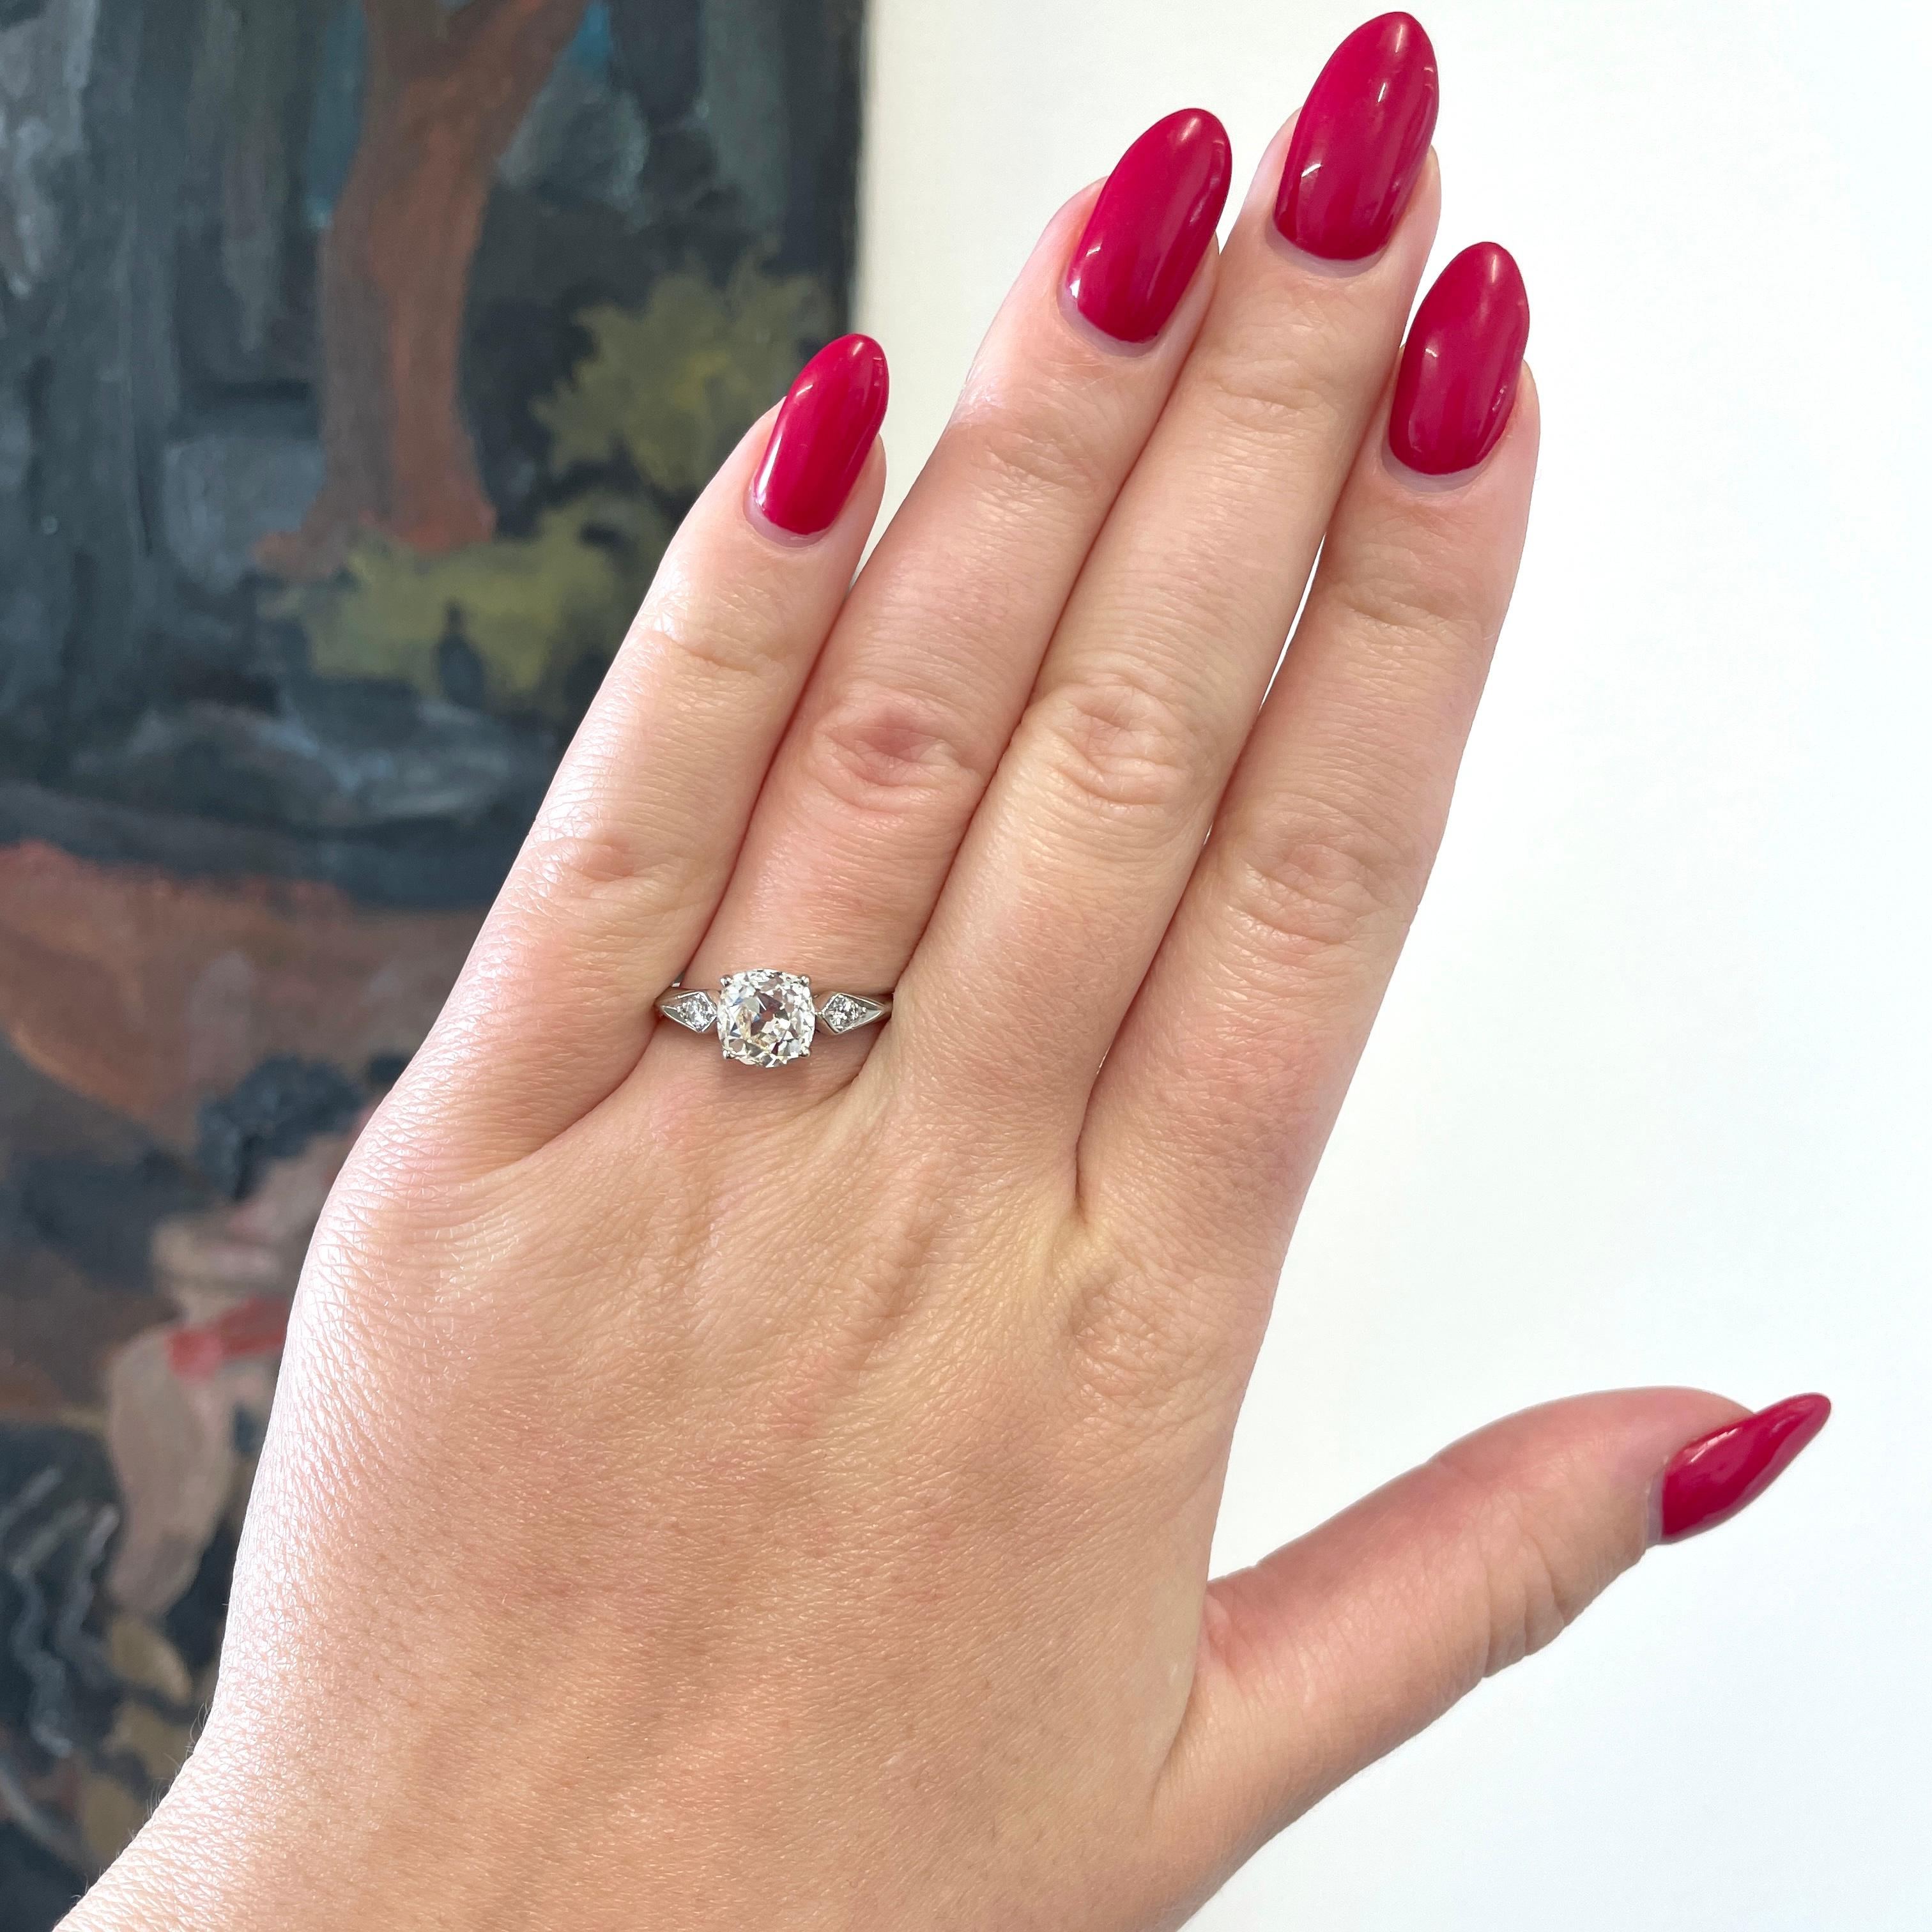 Timeless and classic, this ring is perfect to wear for the rest of your life. The ring speaks of history and will grace your finger with beauty. The center diamond is GIA certified as old Mine cut 2.12 carat, L color, SI2 clarity (#2211308823).